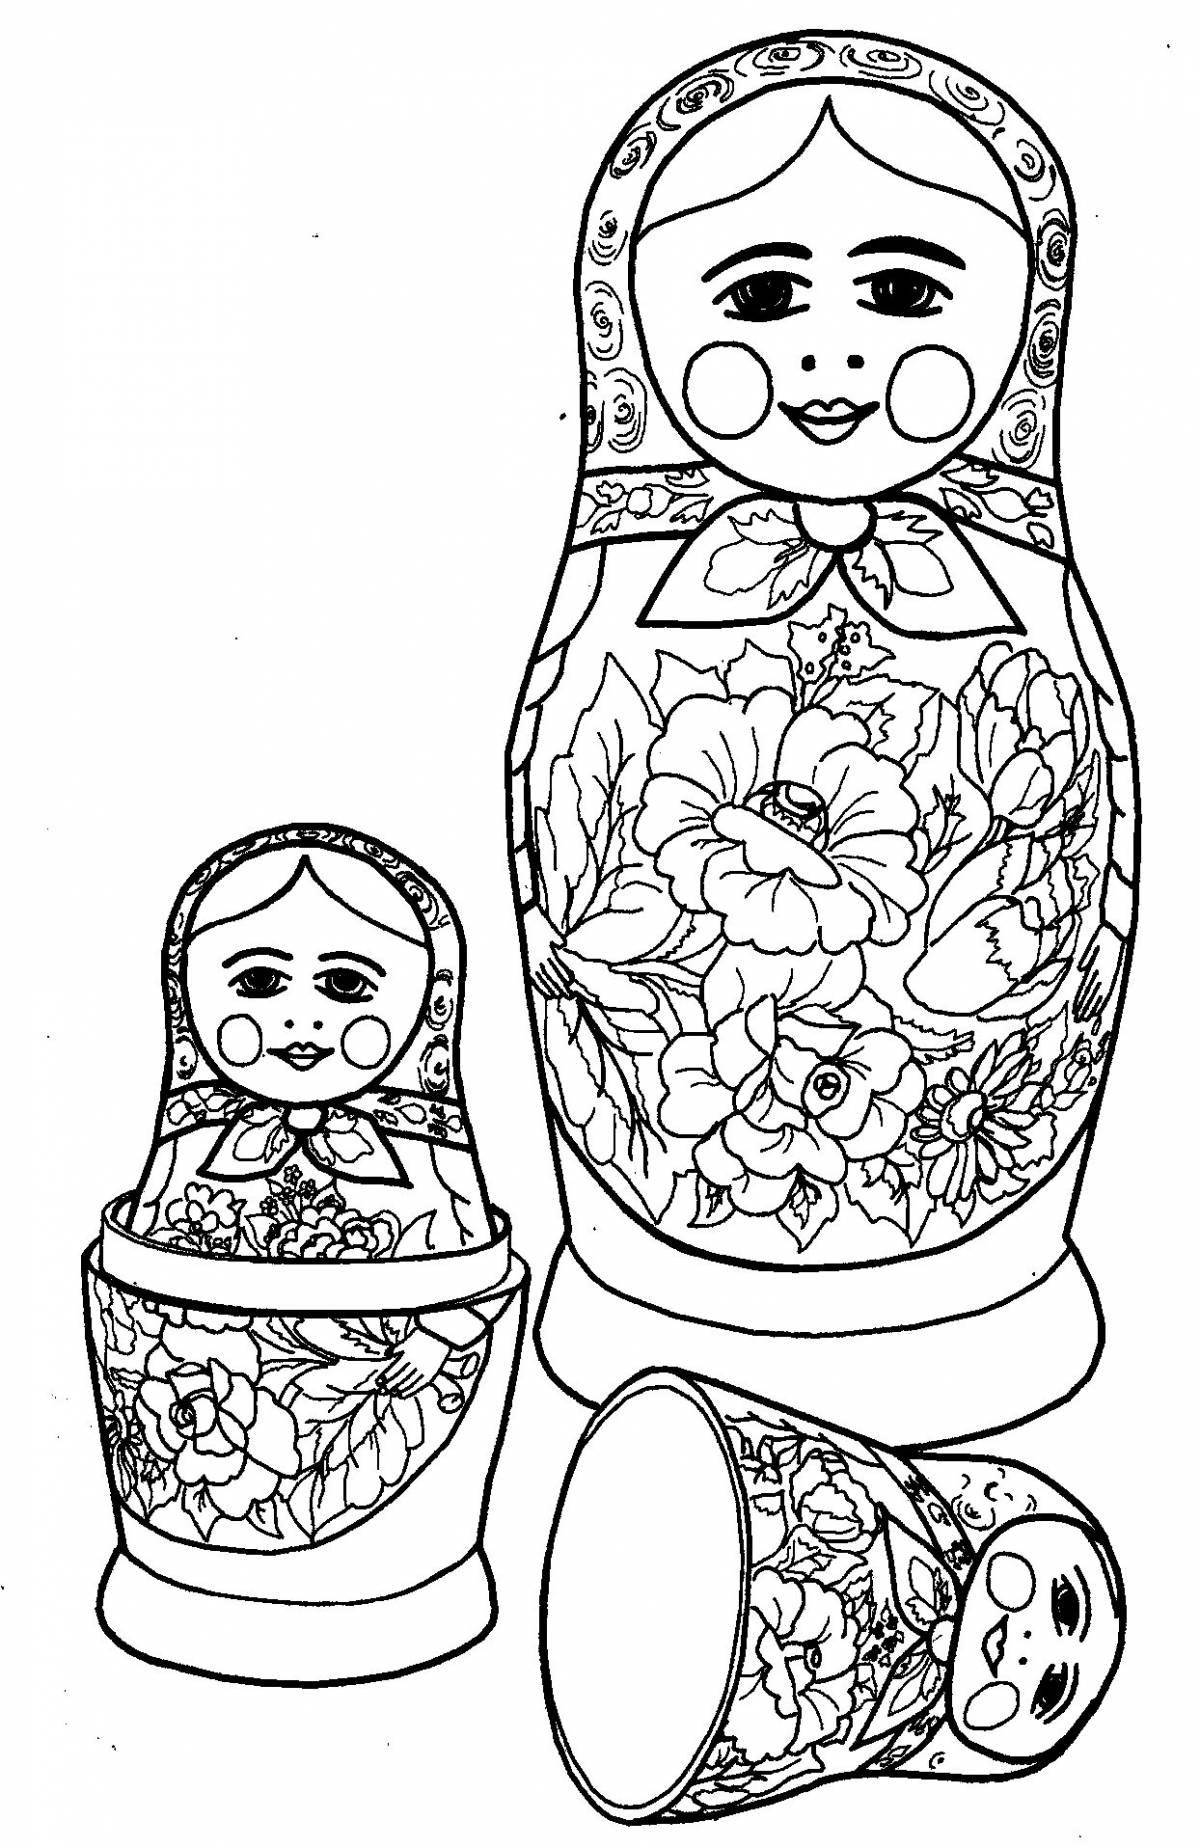 Coloring radiant russian matryoshka for children 6-7 years old